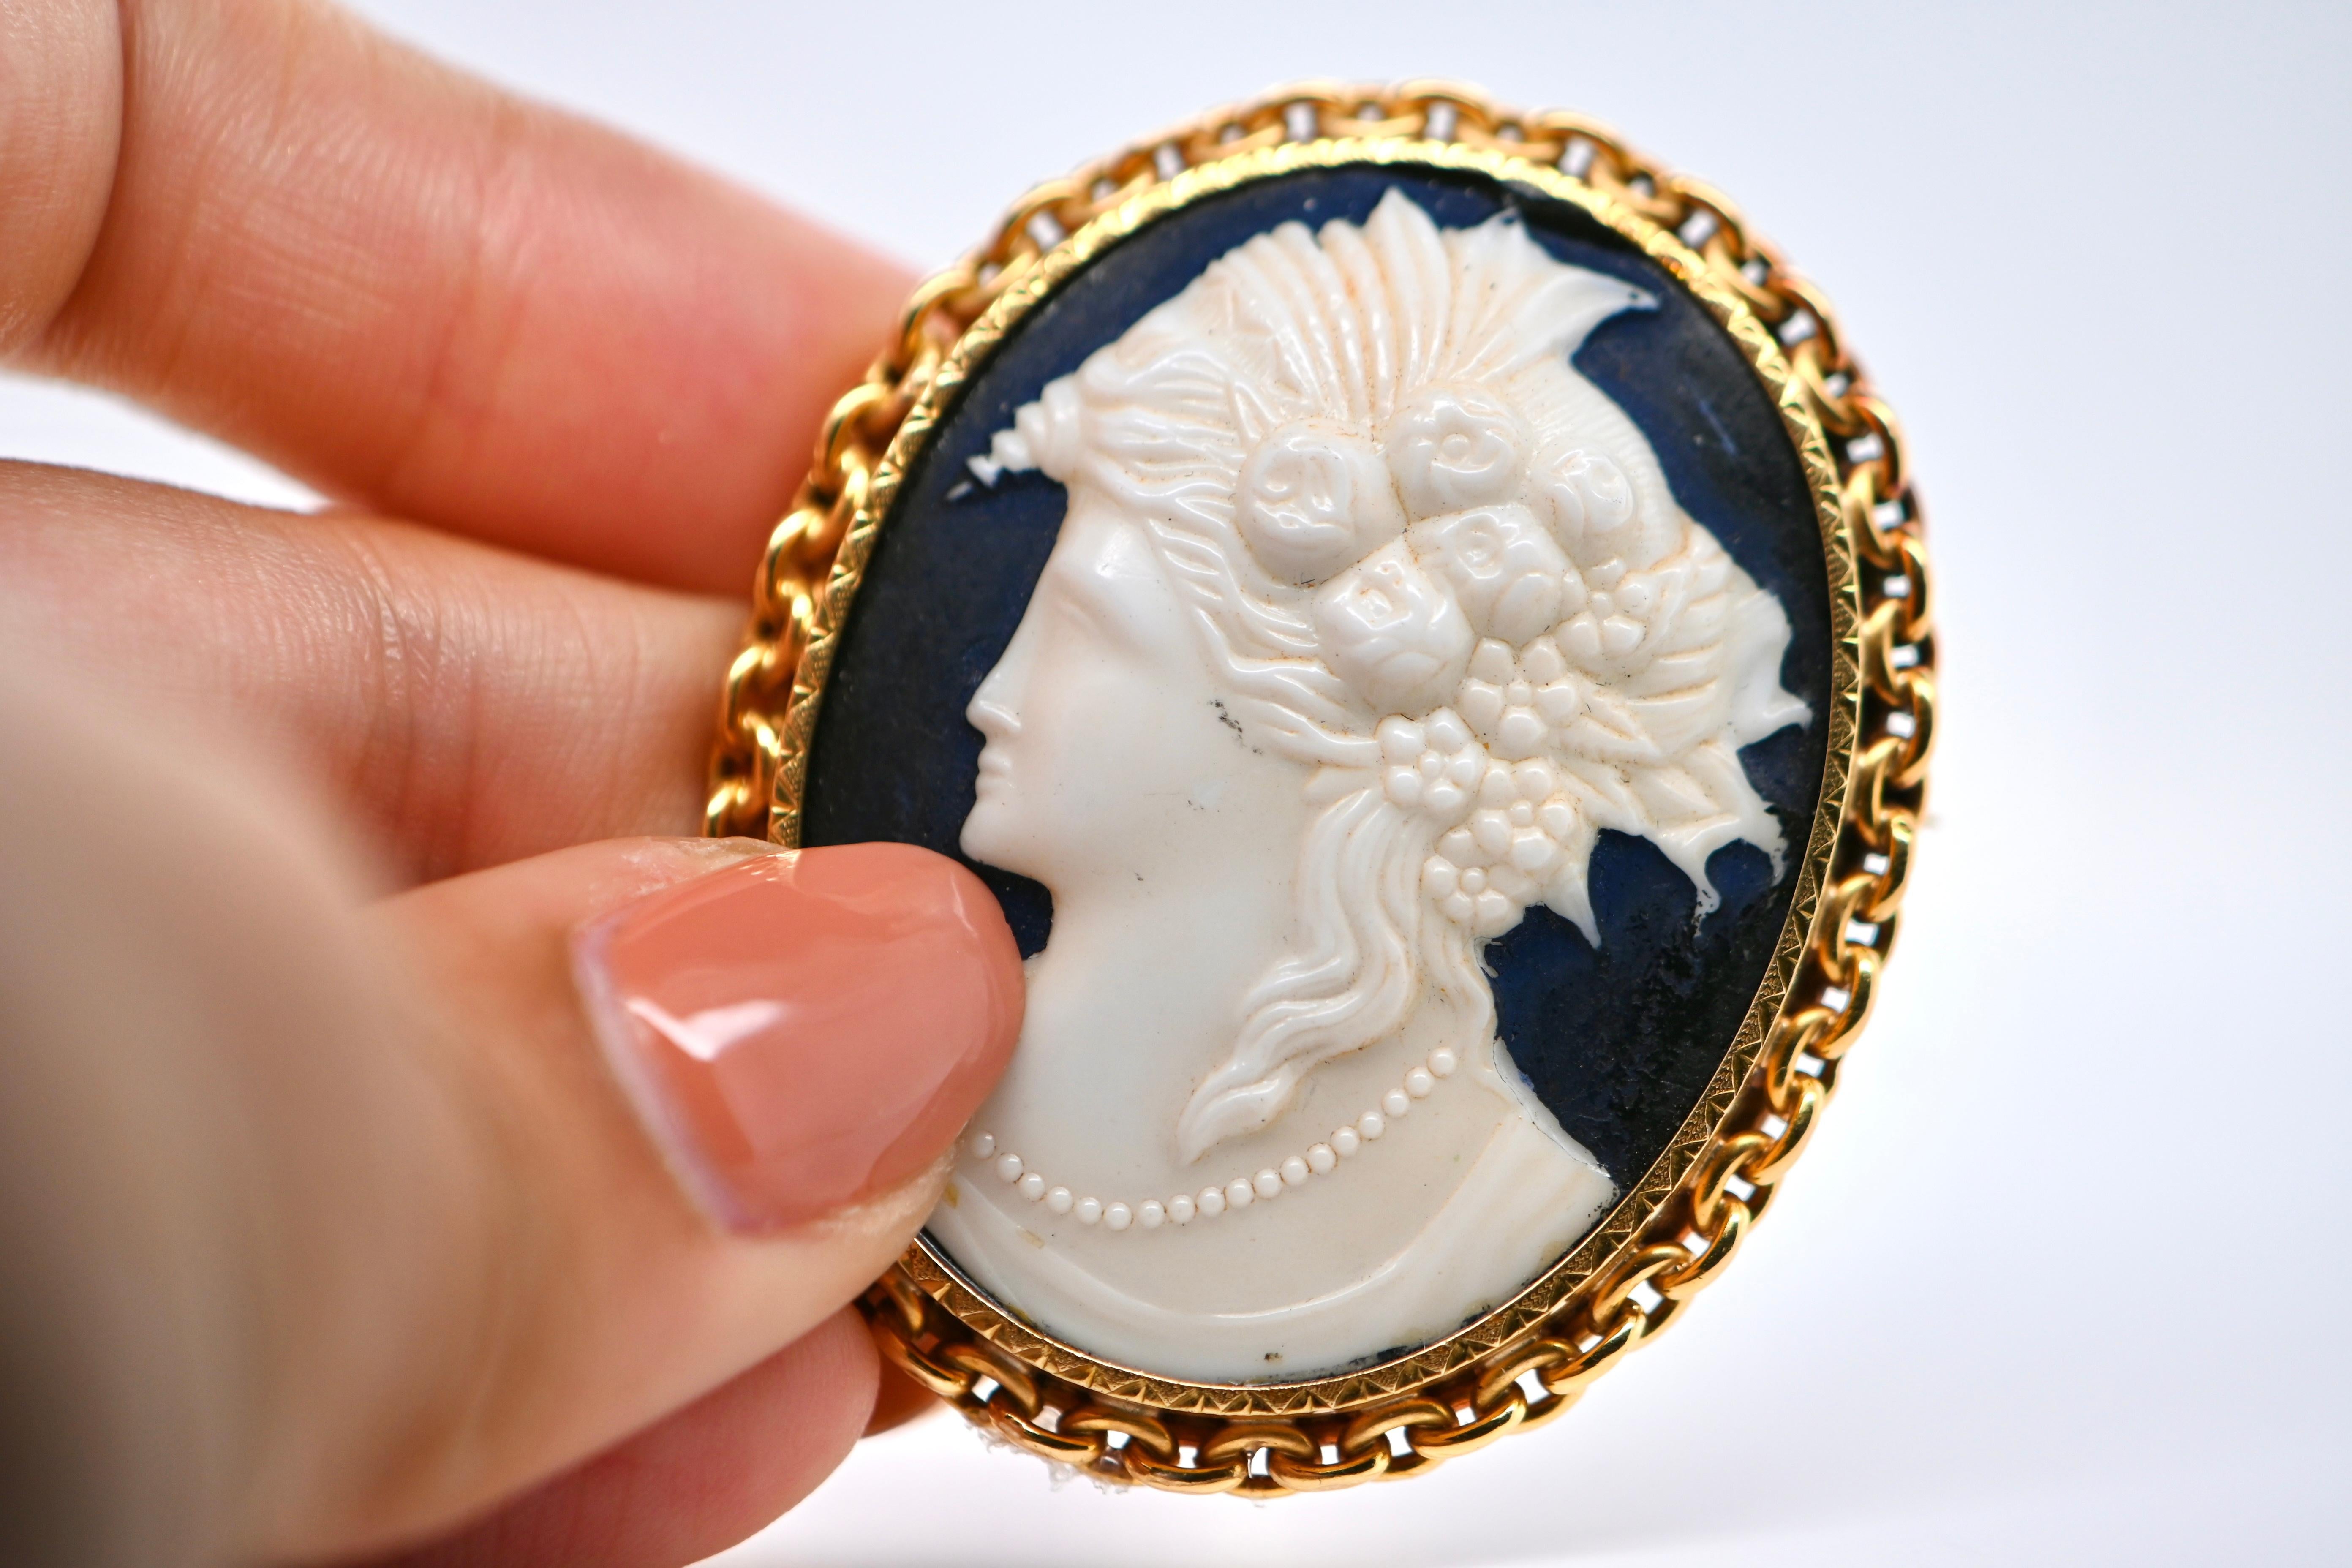 A unique antique brooch in French 18-carat yellow gold. Made in France around 1930, this period piece perfectly embodies the style and craftsmanship of this emblematic period.

The cameo is the central element of this brooch, offering a striking